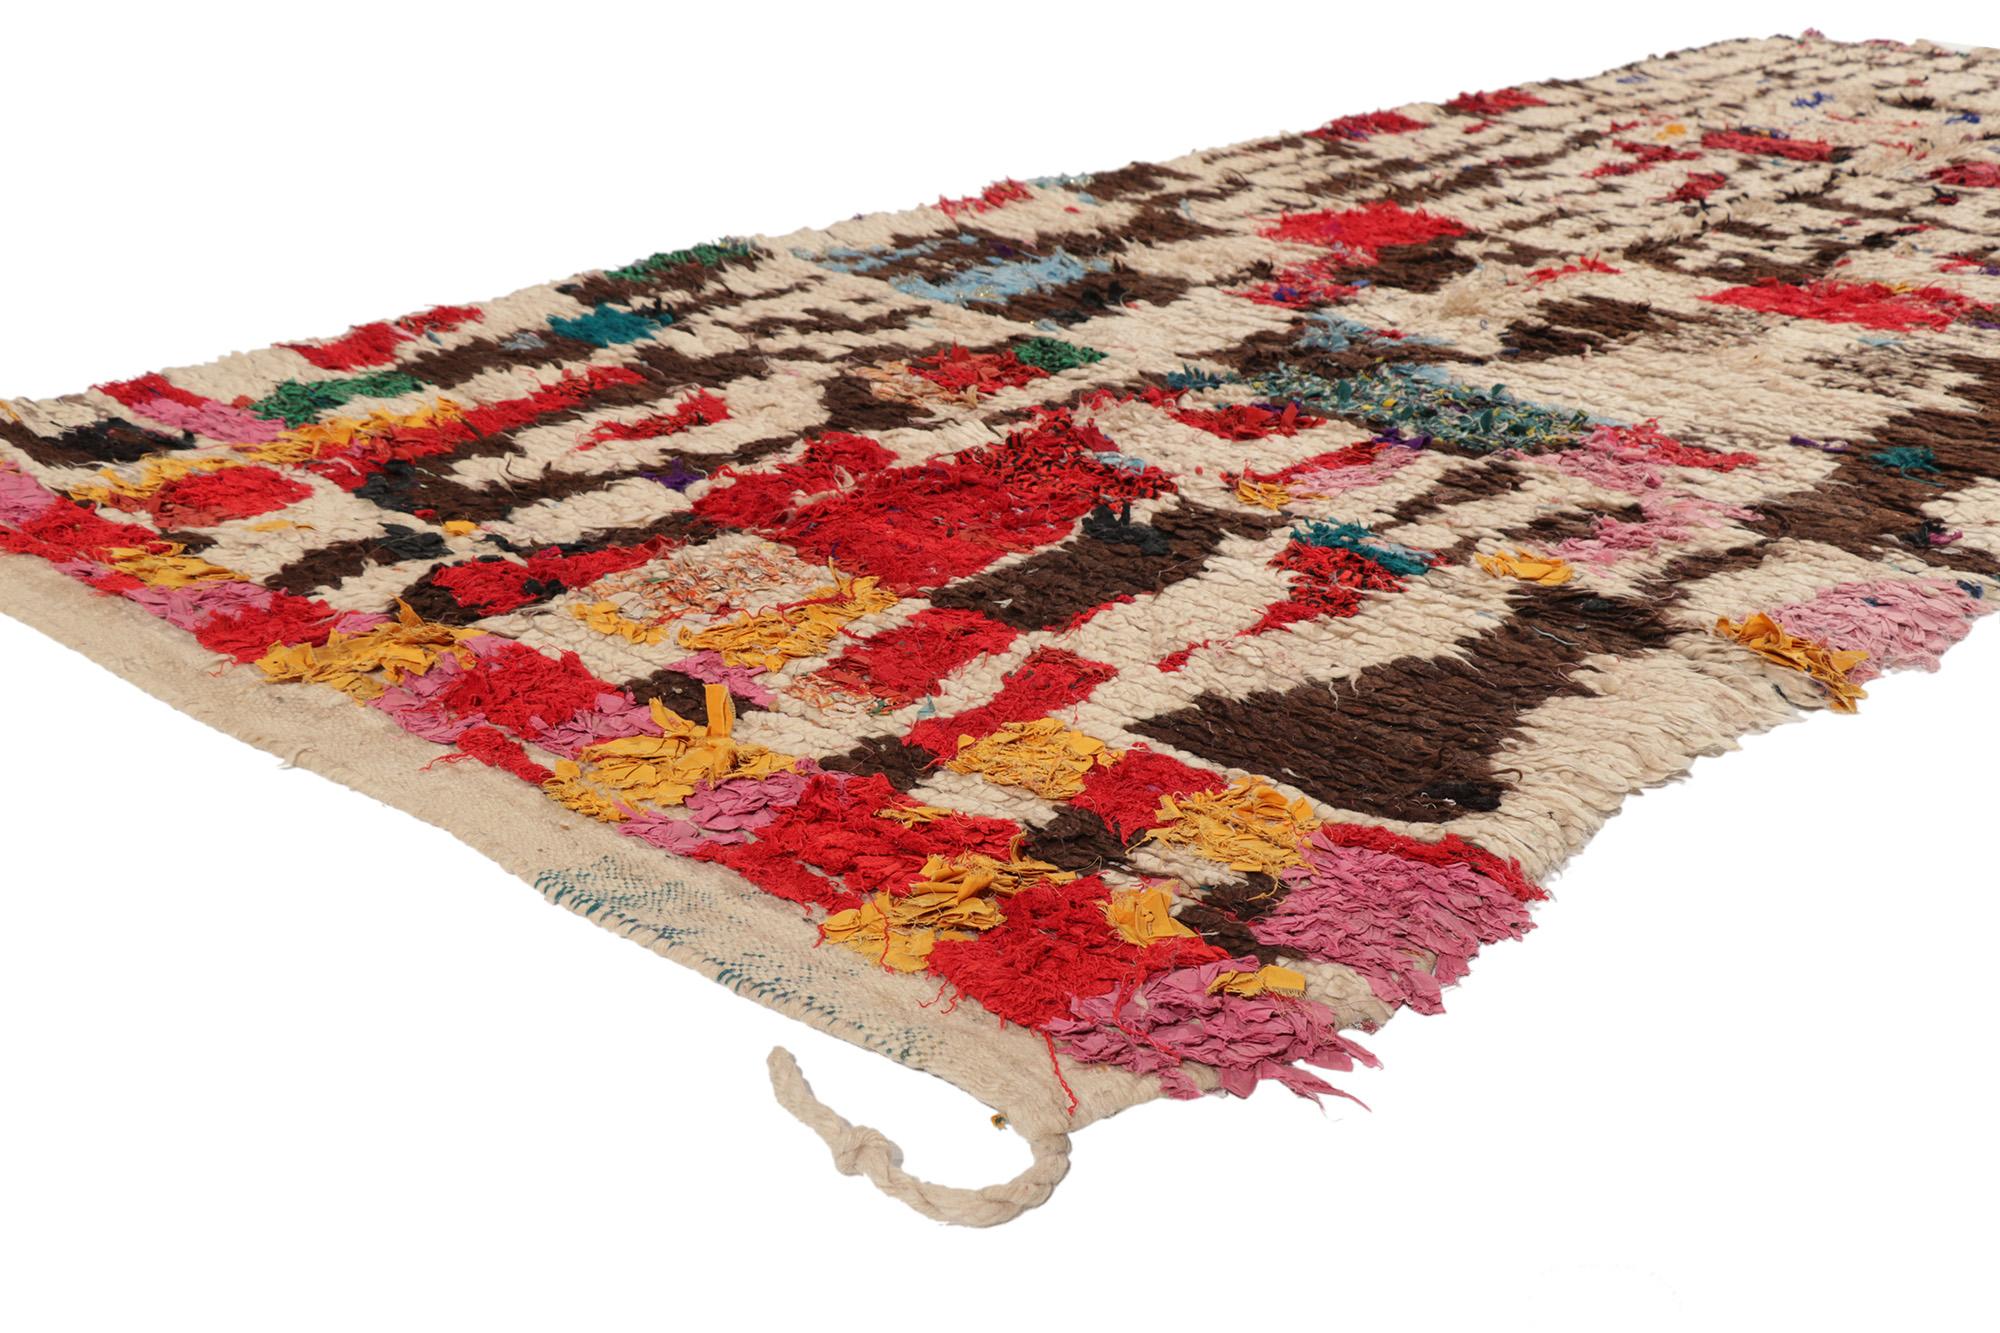 20095 Vintage Talsint Moroccan Rag Rug, 04'06 x 11'04. Talsint rag rugs, also known as Talsint Boucherouite rugs, originate from the Talsint region in southeastern Morocco. Crafted by Berber artisans, these rugs are made using recycled textiles like